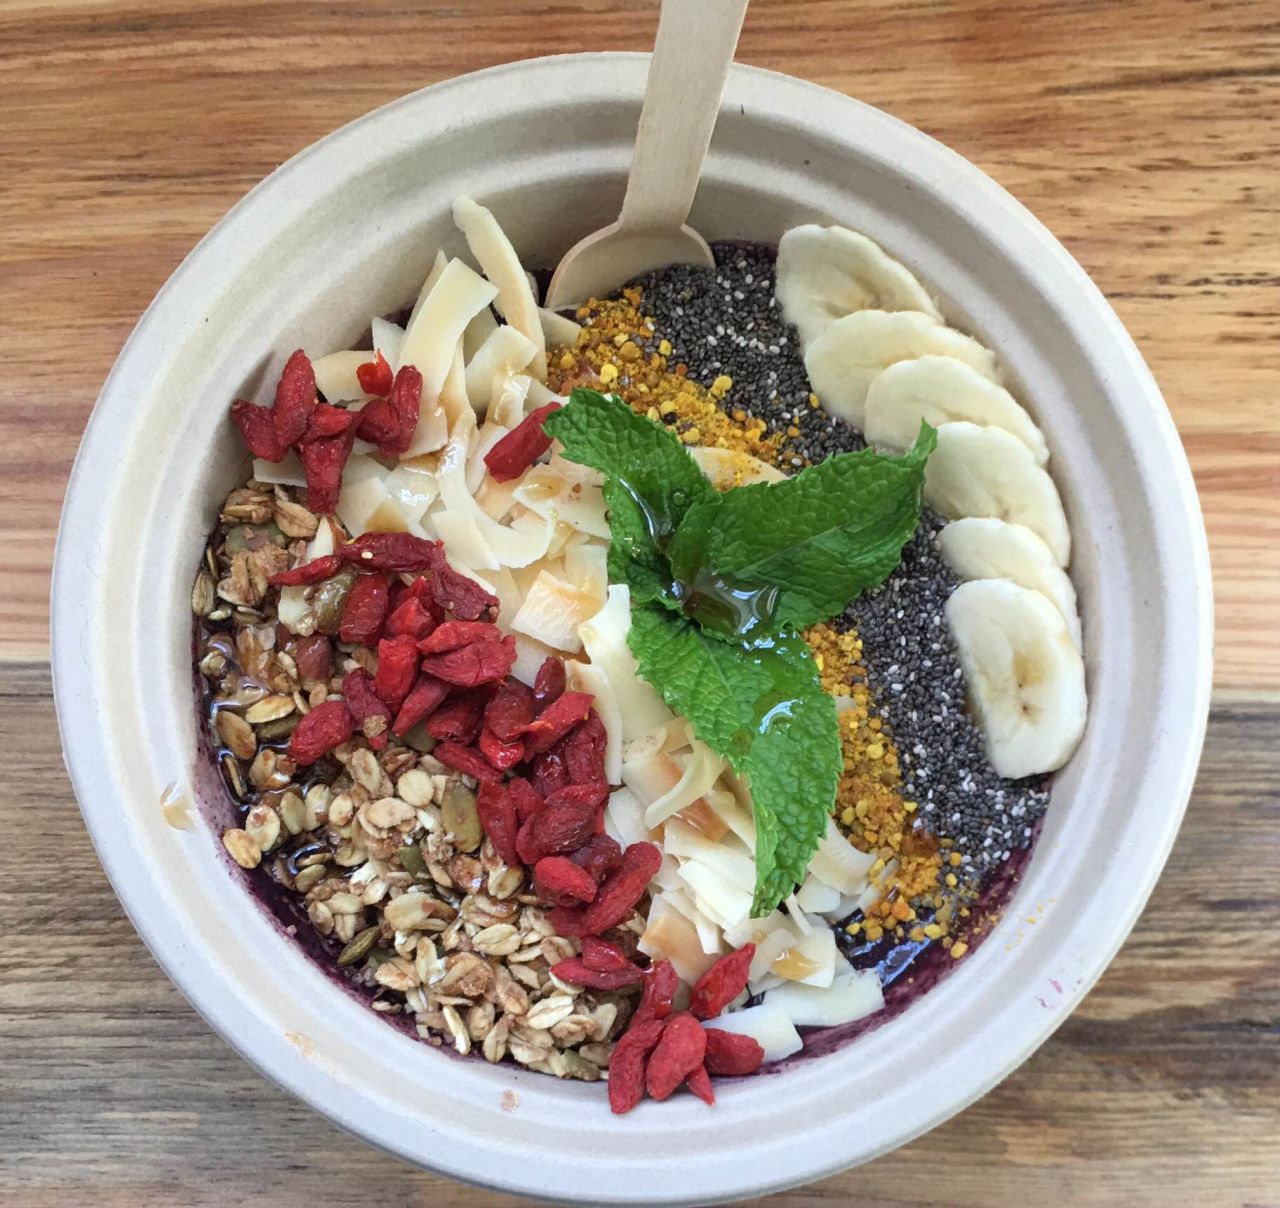 BŌL, a tiny shop on the grounds of the Wagner at Duck Creek hotel, offers a variety of both sweet and savory acai bowls, adding fresh berries, banana, peanut butter and beets to bowls based on the little Amazon berry.